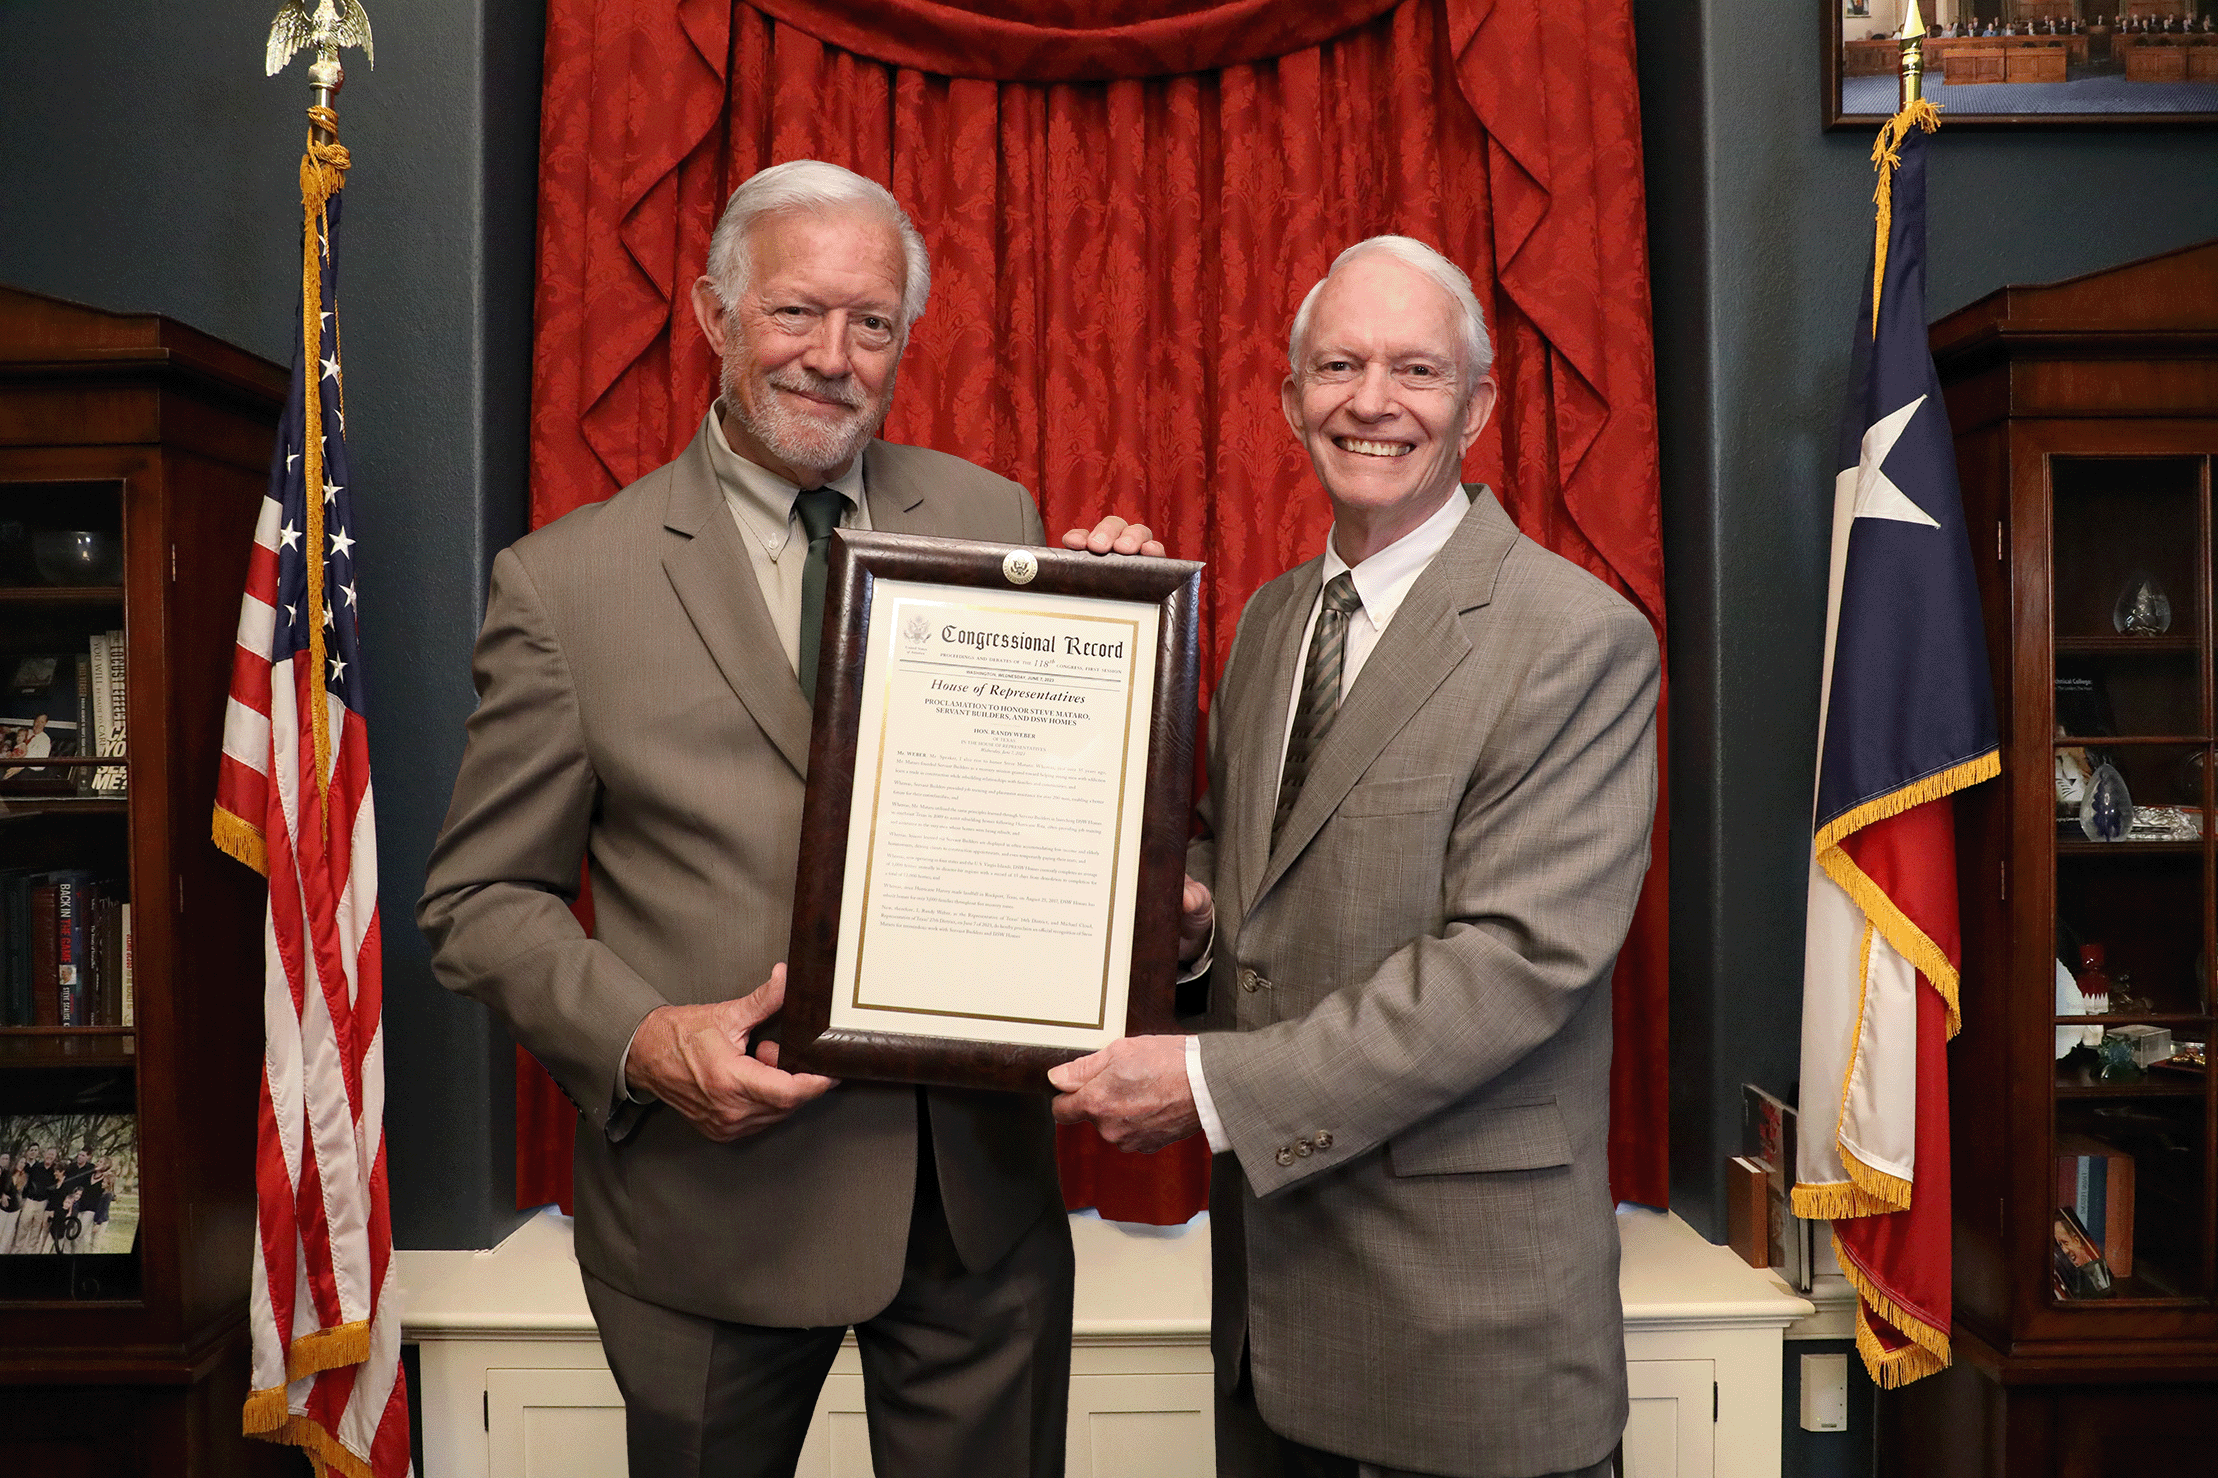 Texas Rep. Randy K. Weber presents a congressional recognition plaque to GrantWorks' founder and President Bruce J. Spitzengel.